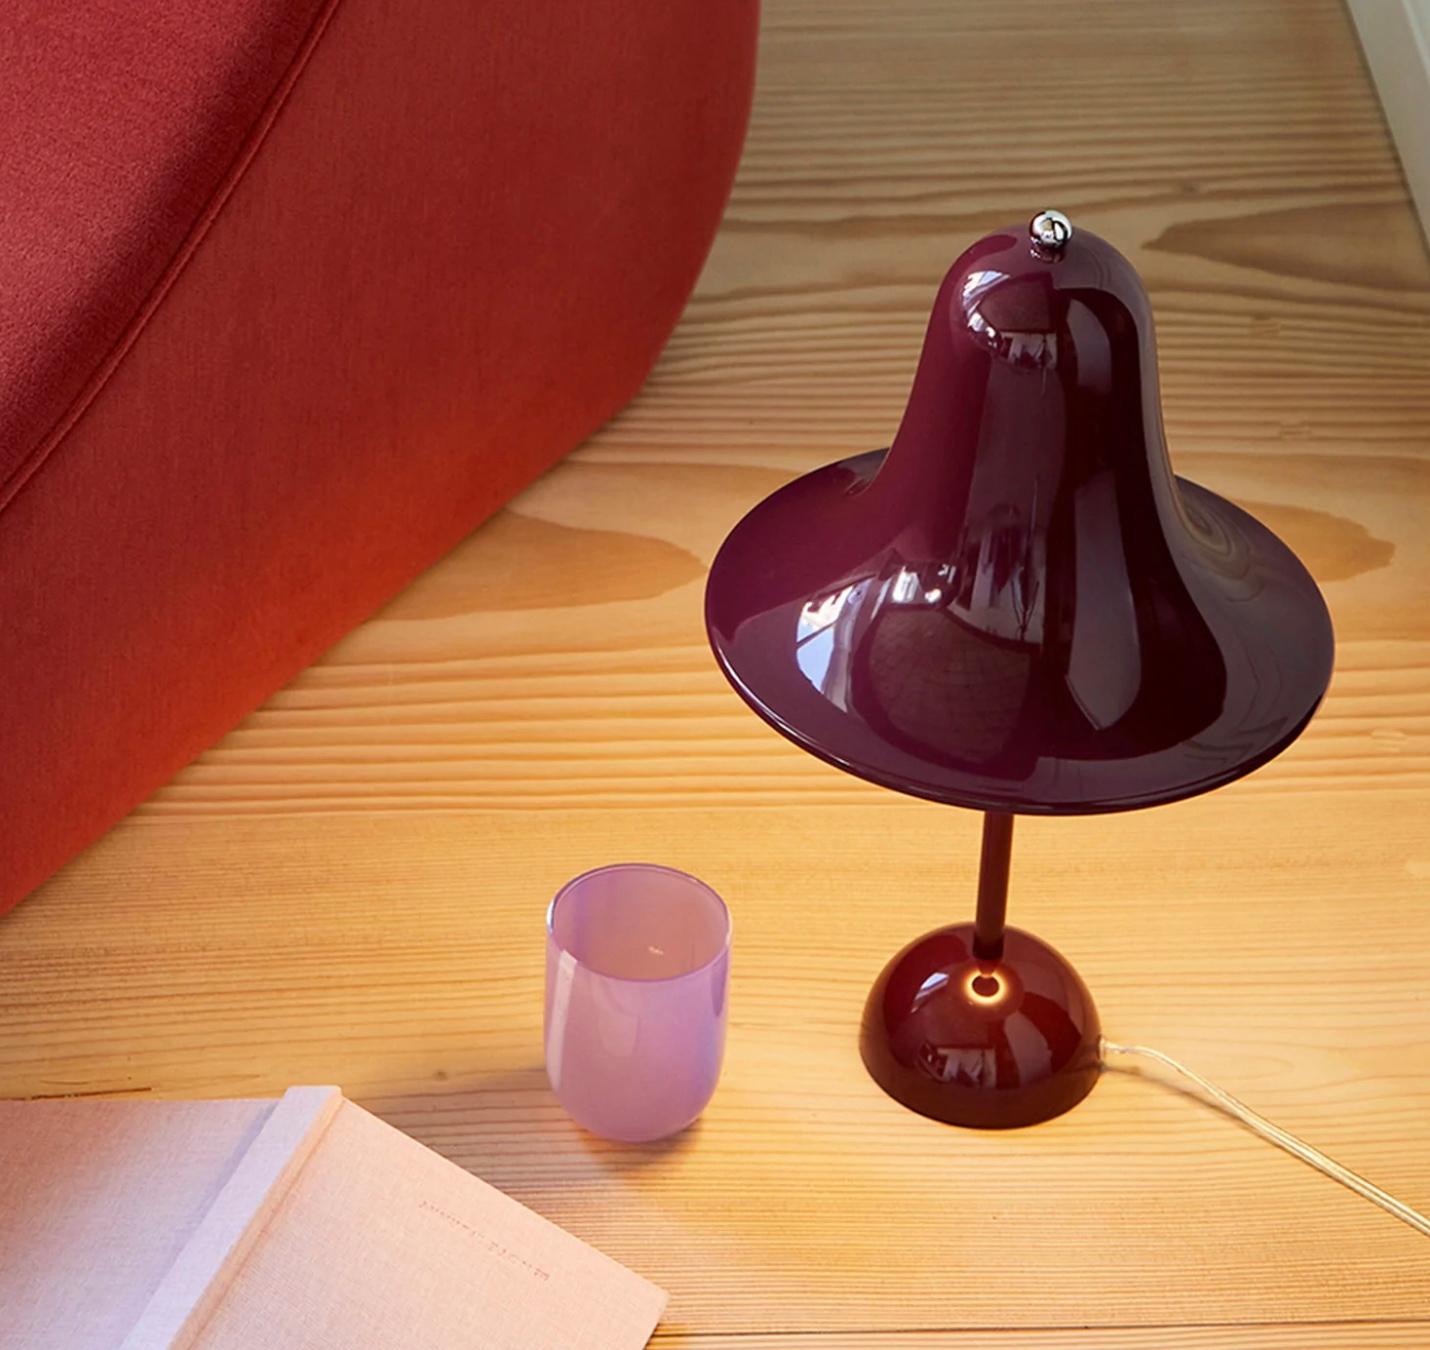 Verner Panton 'Pantop' table lamp in 'Burgundy' for Verpan. Designed in 1980. New, current production.

The elegant Pantop line was designed by Verner Panton in 1980, and has for a long time been a staple of the Verpan collection. Pantop is